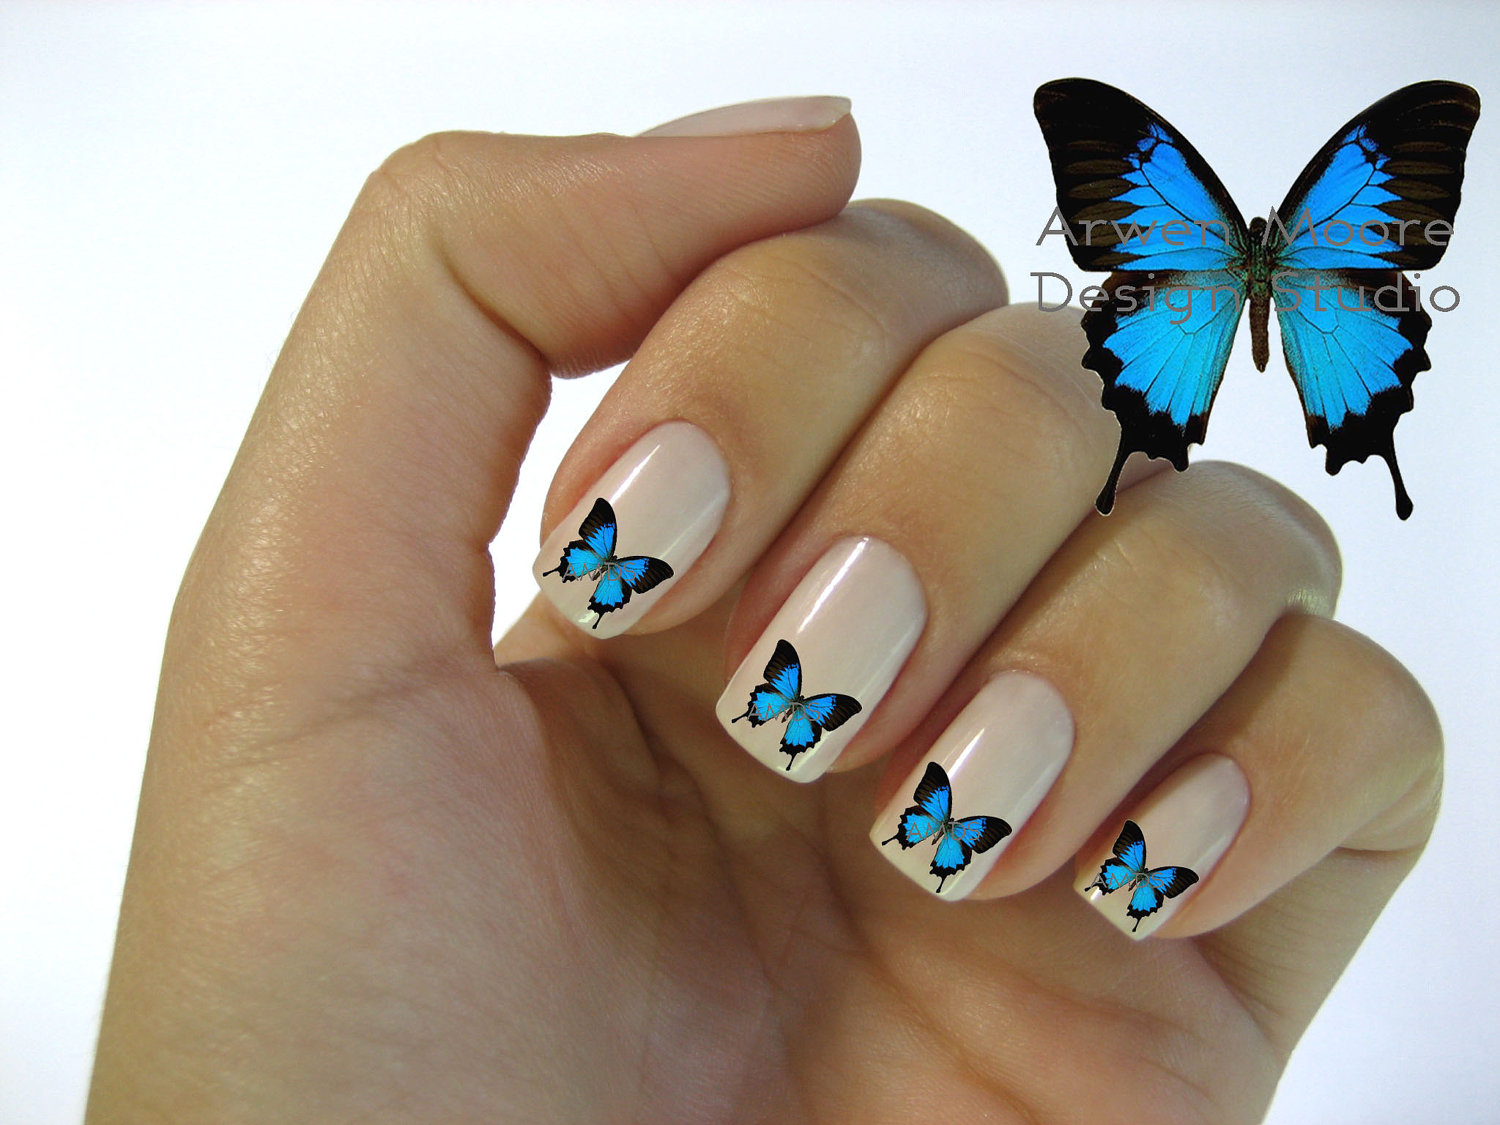 1. Butterfly Nail Art Designs for Summer - wide 6